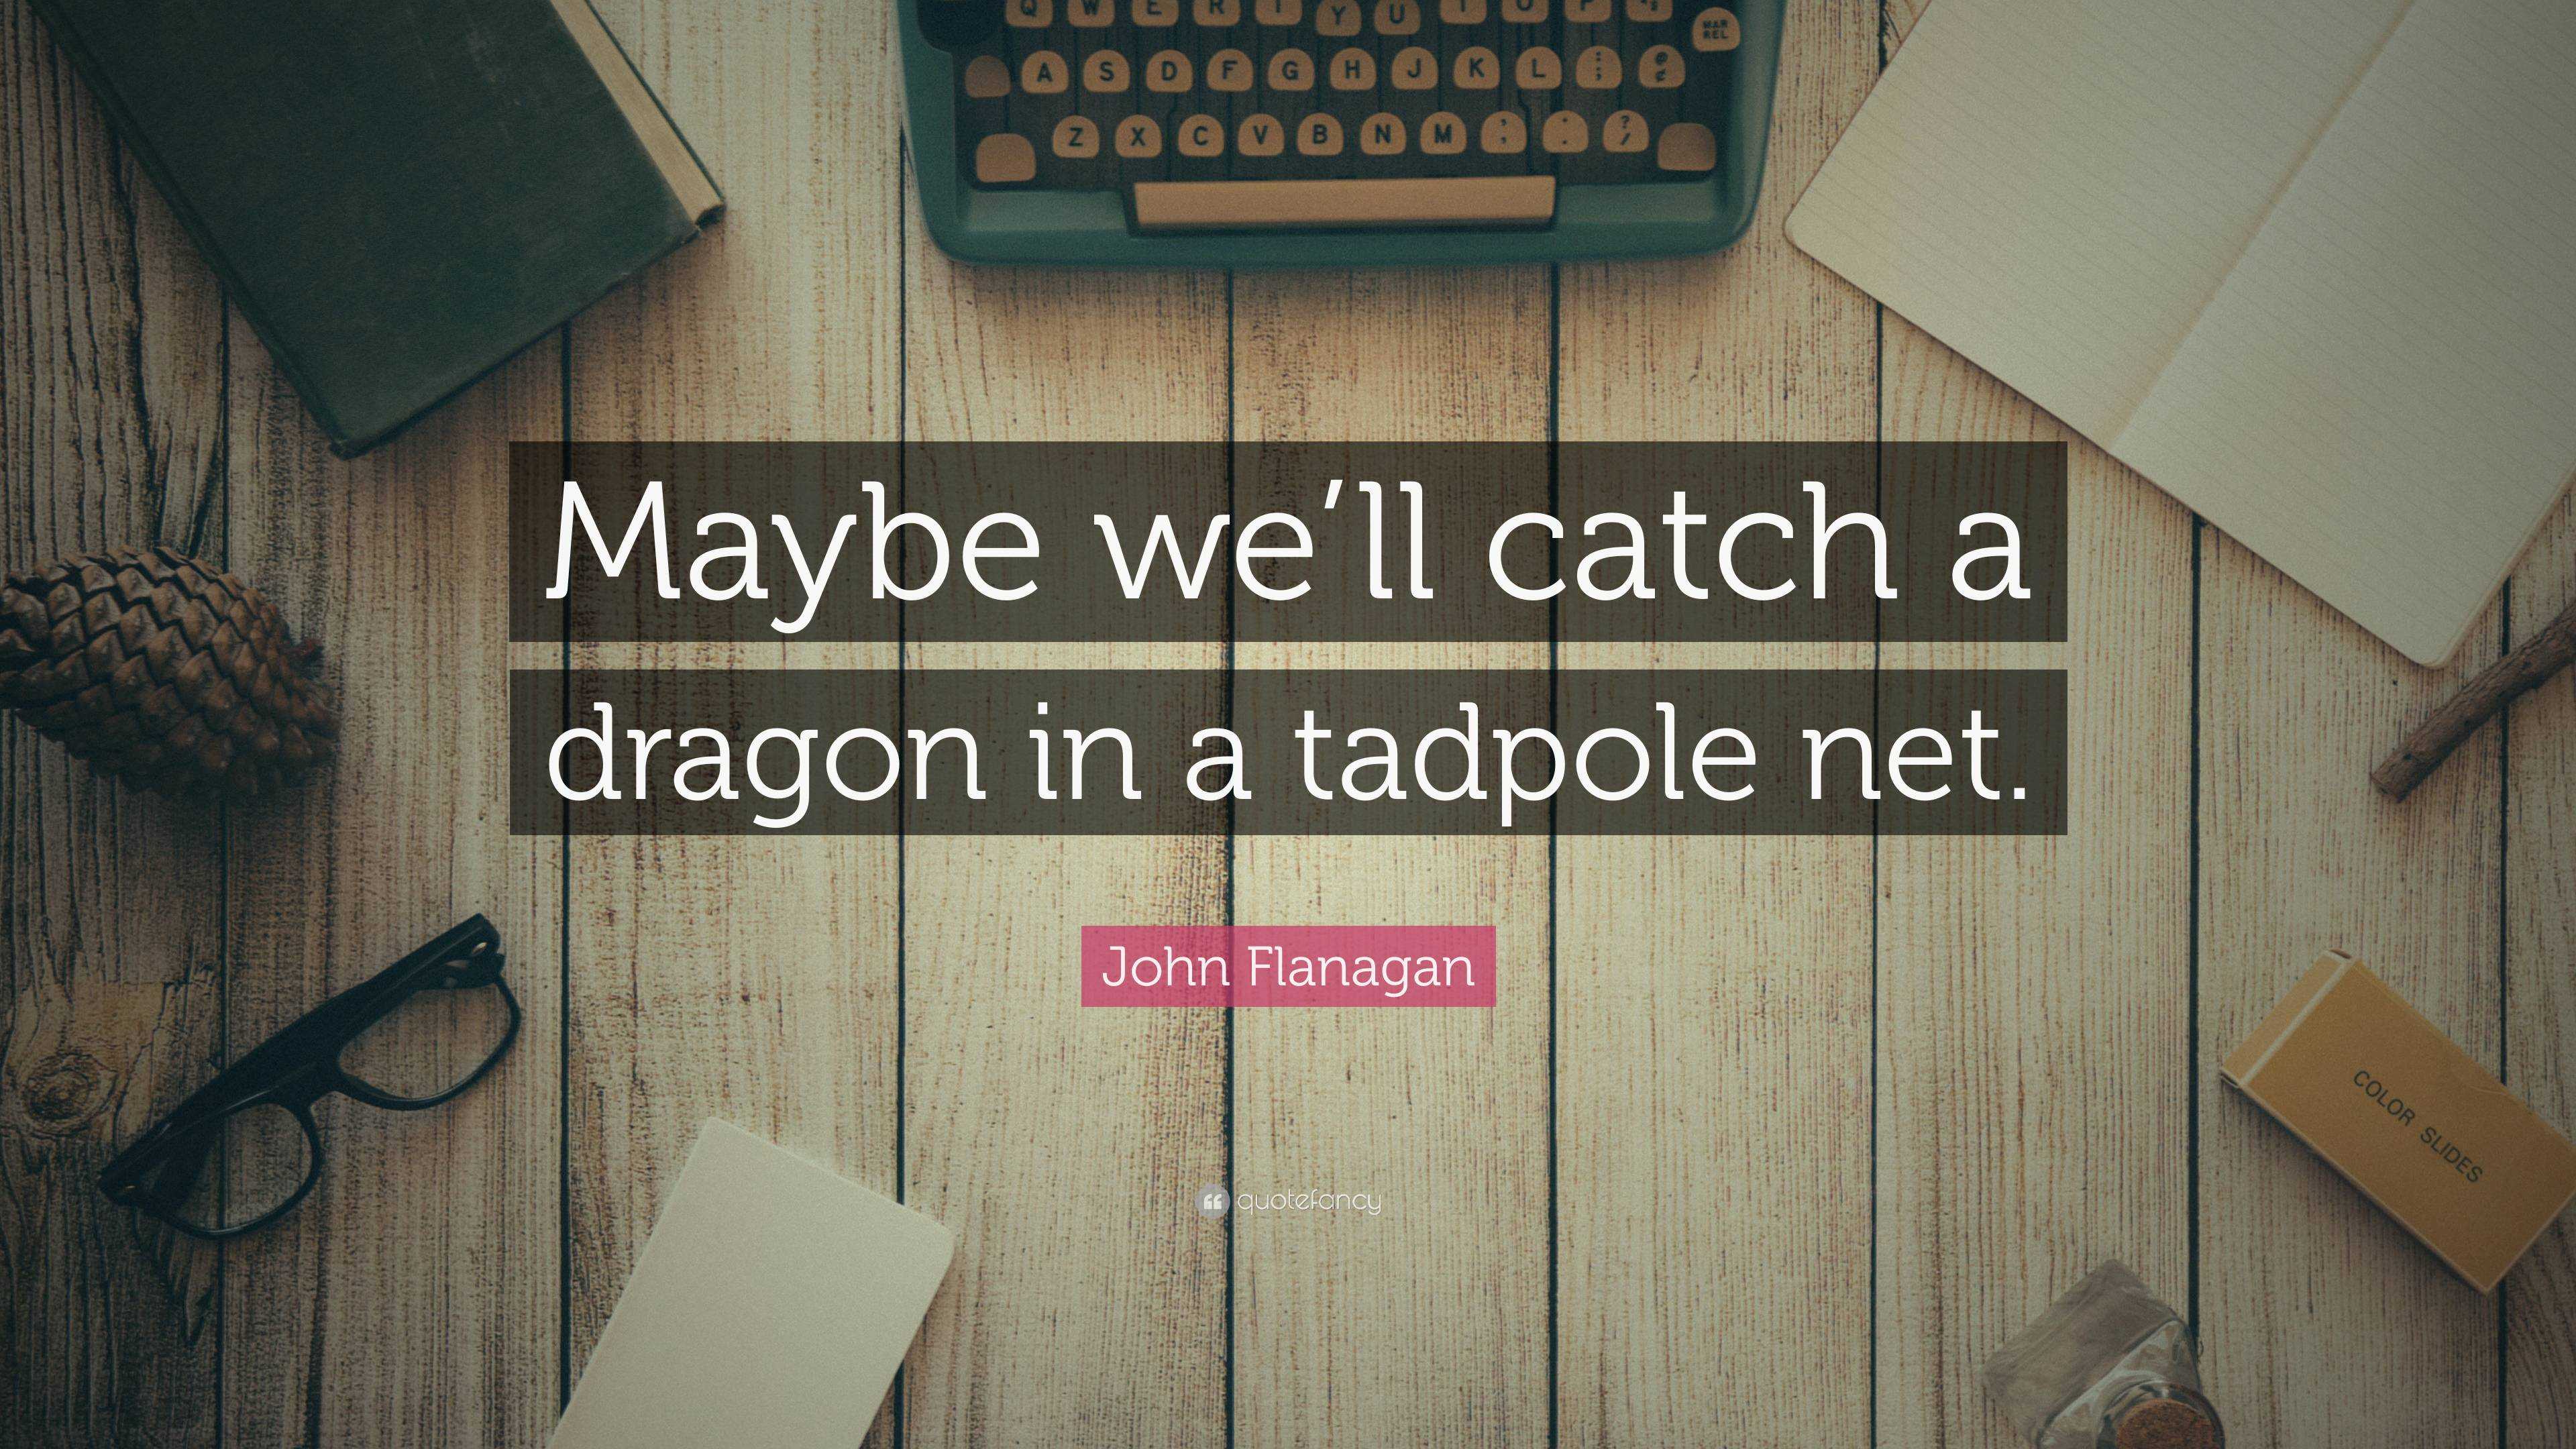 https://quotefancy.com/media/wallpaper/3840x2160/6931074-John-Flanagan-Quote-Maybe-we-ll-catch-a-dragon-in-a-tadpole-net.jpg